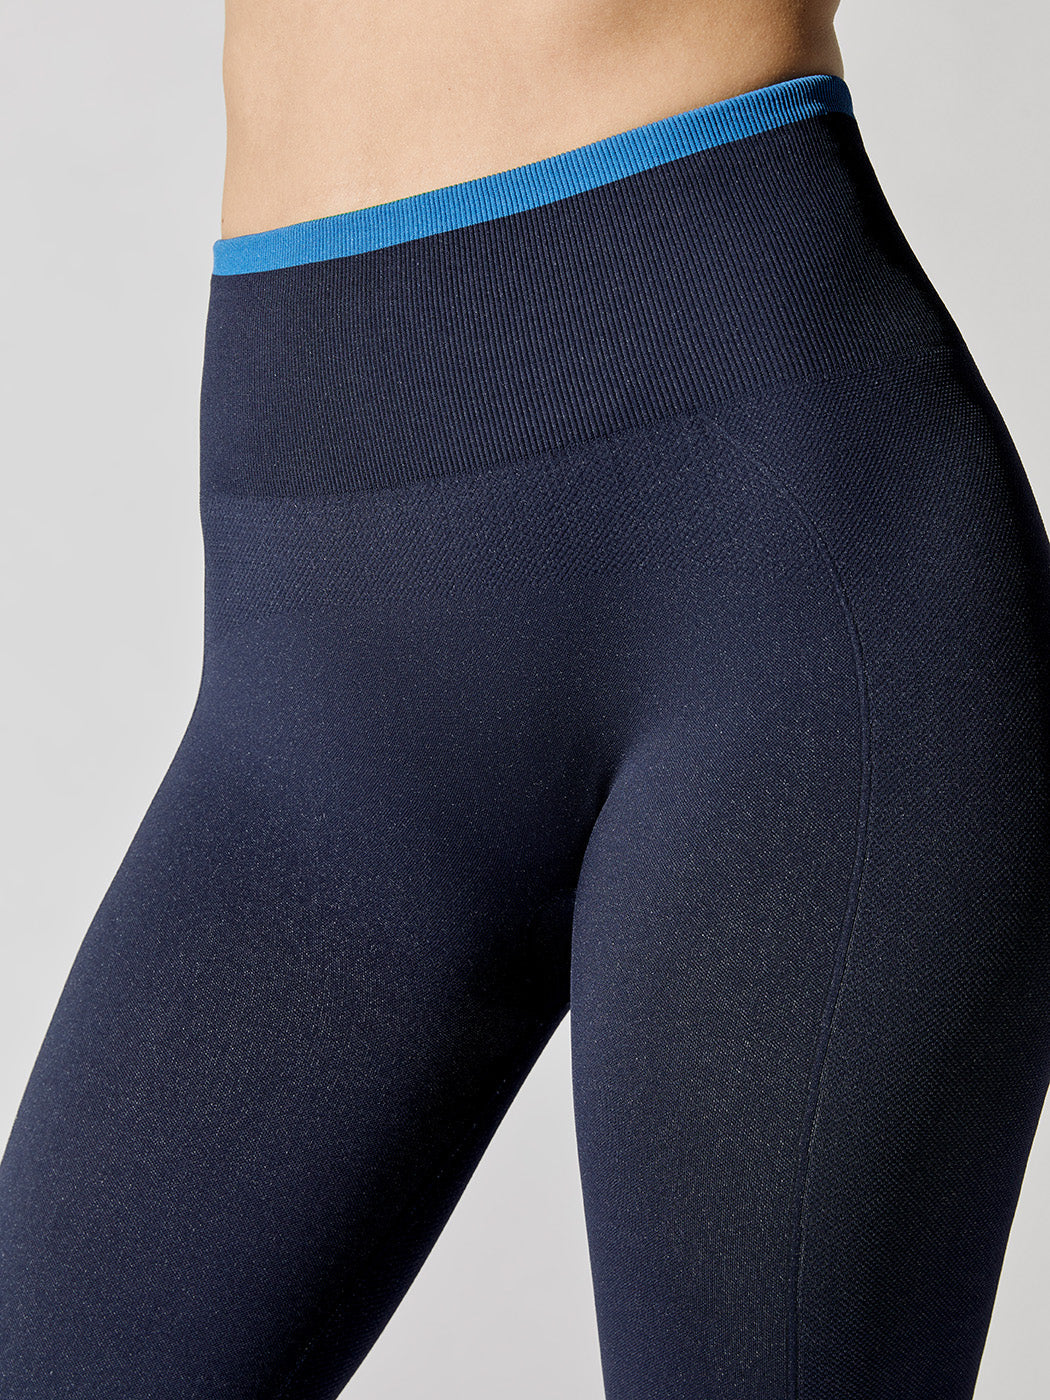 Workout Leggings: A Complete Guide